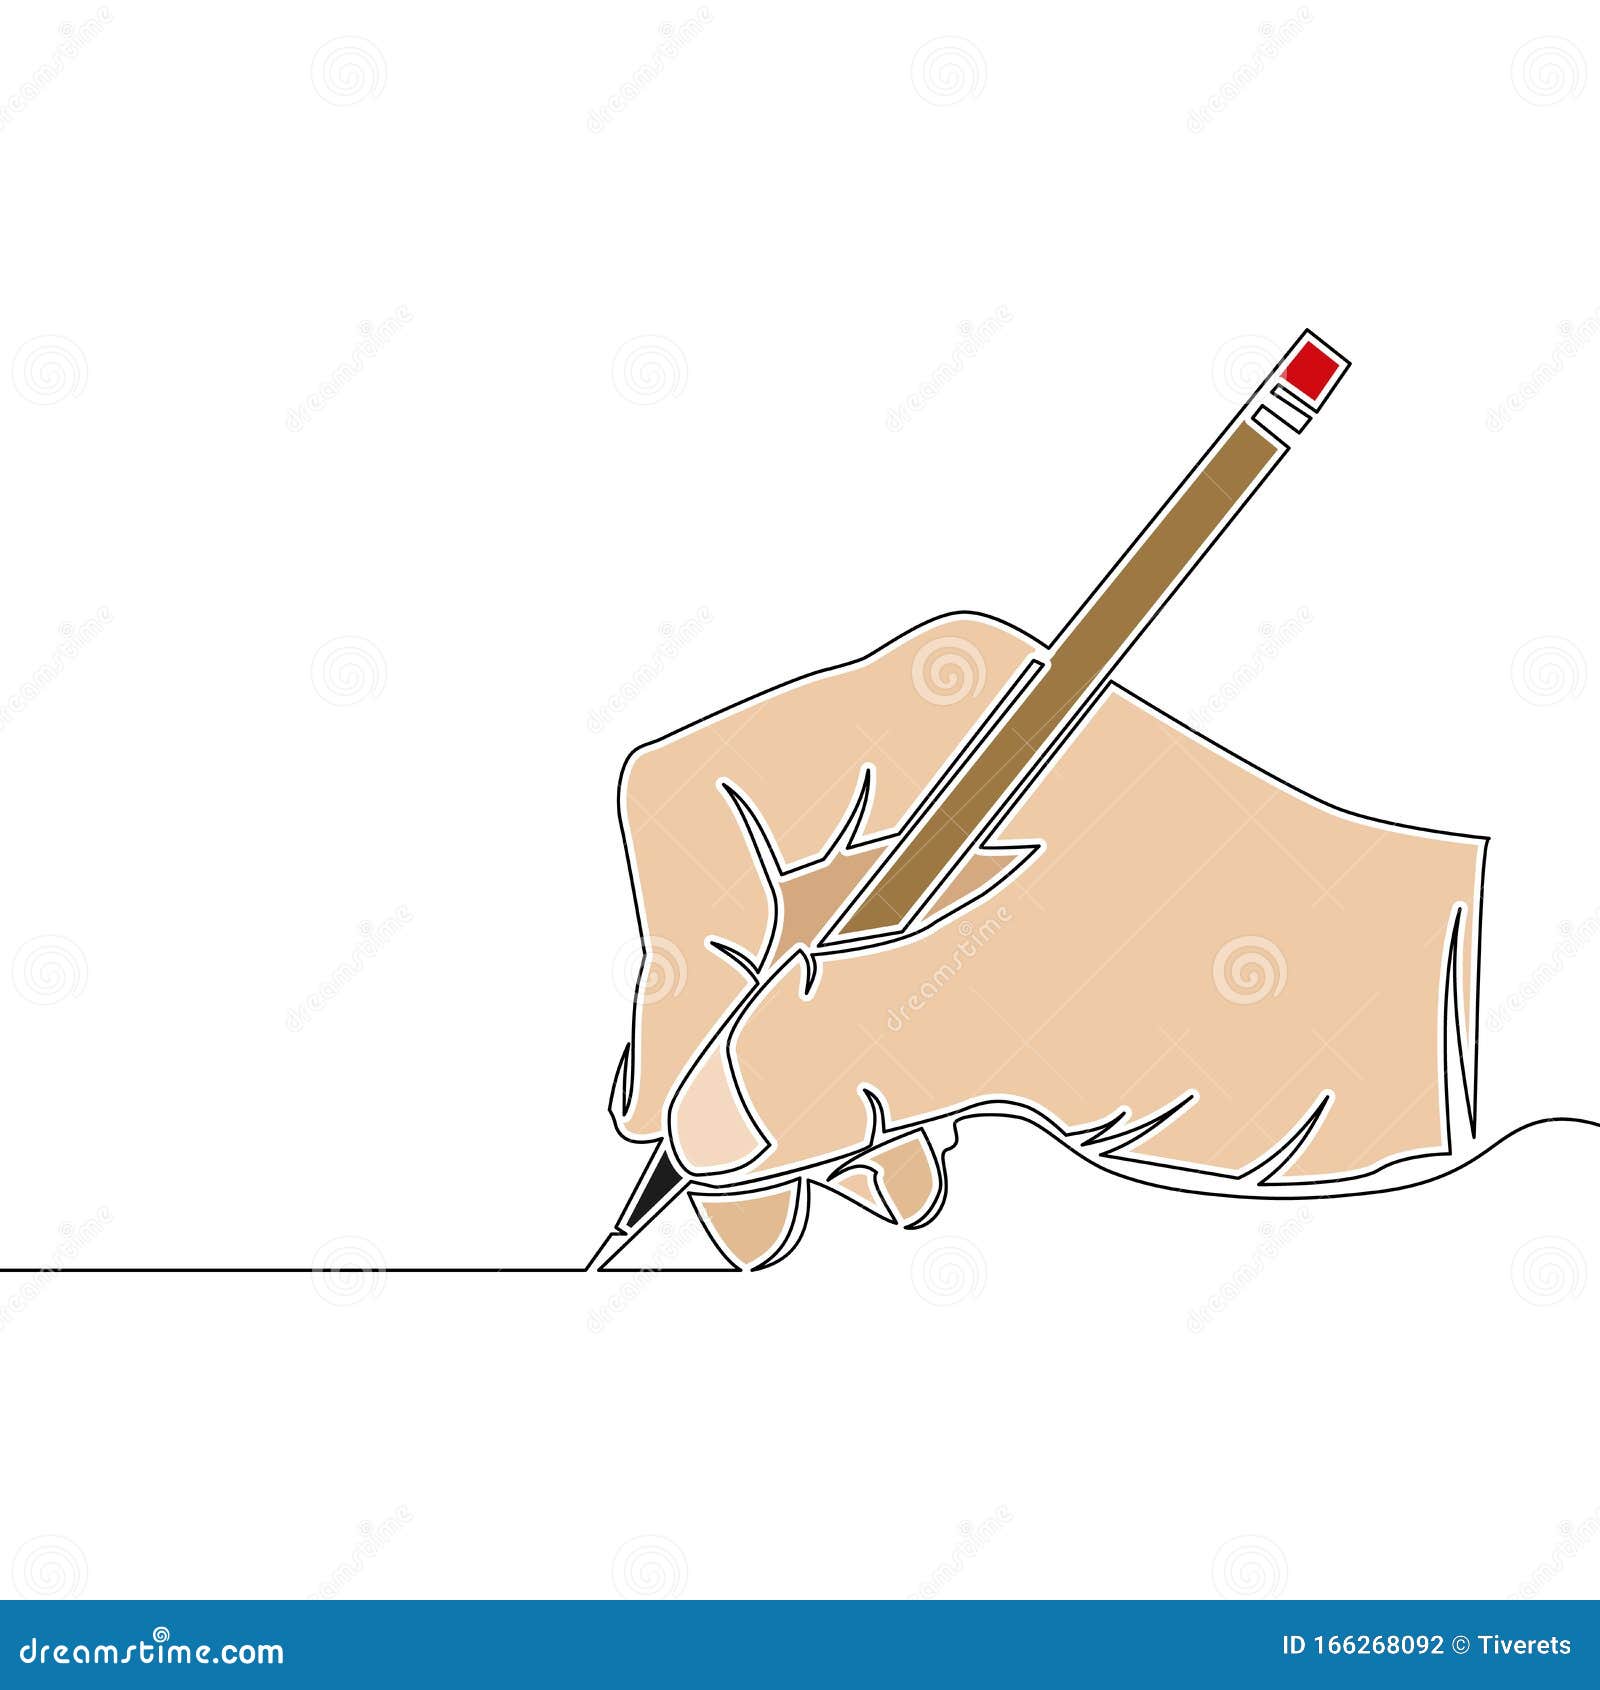 Flat Colorful Line Art Hand Holding Pencil Concept Stock Vector